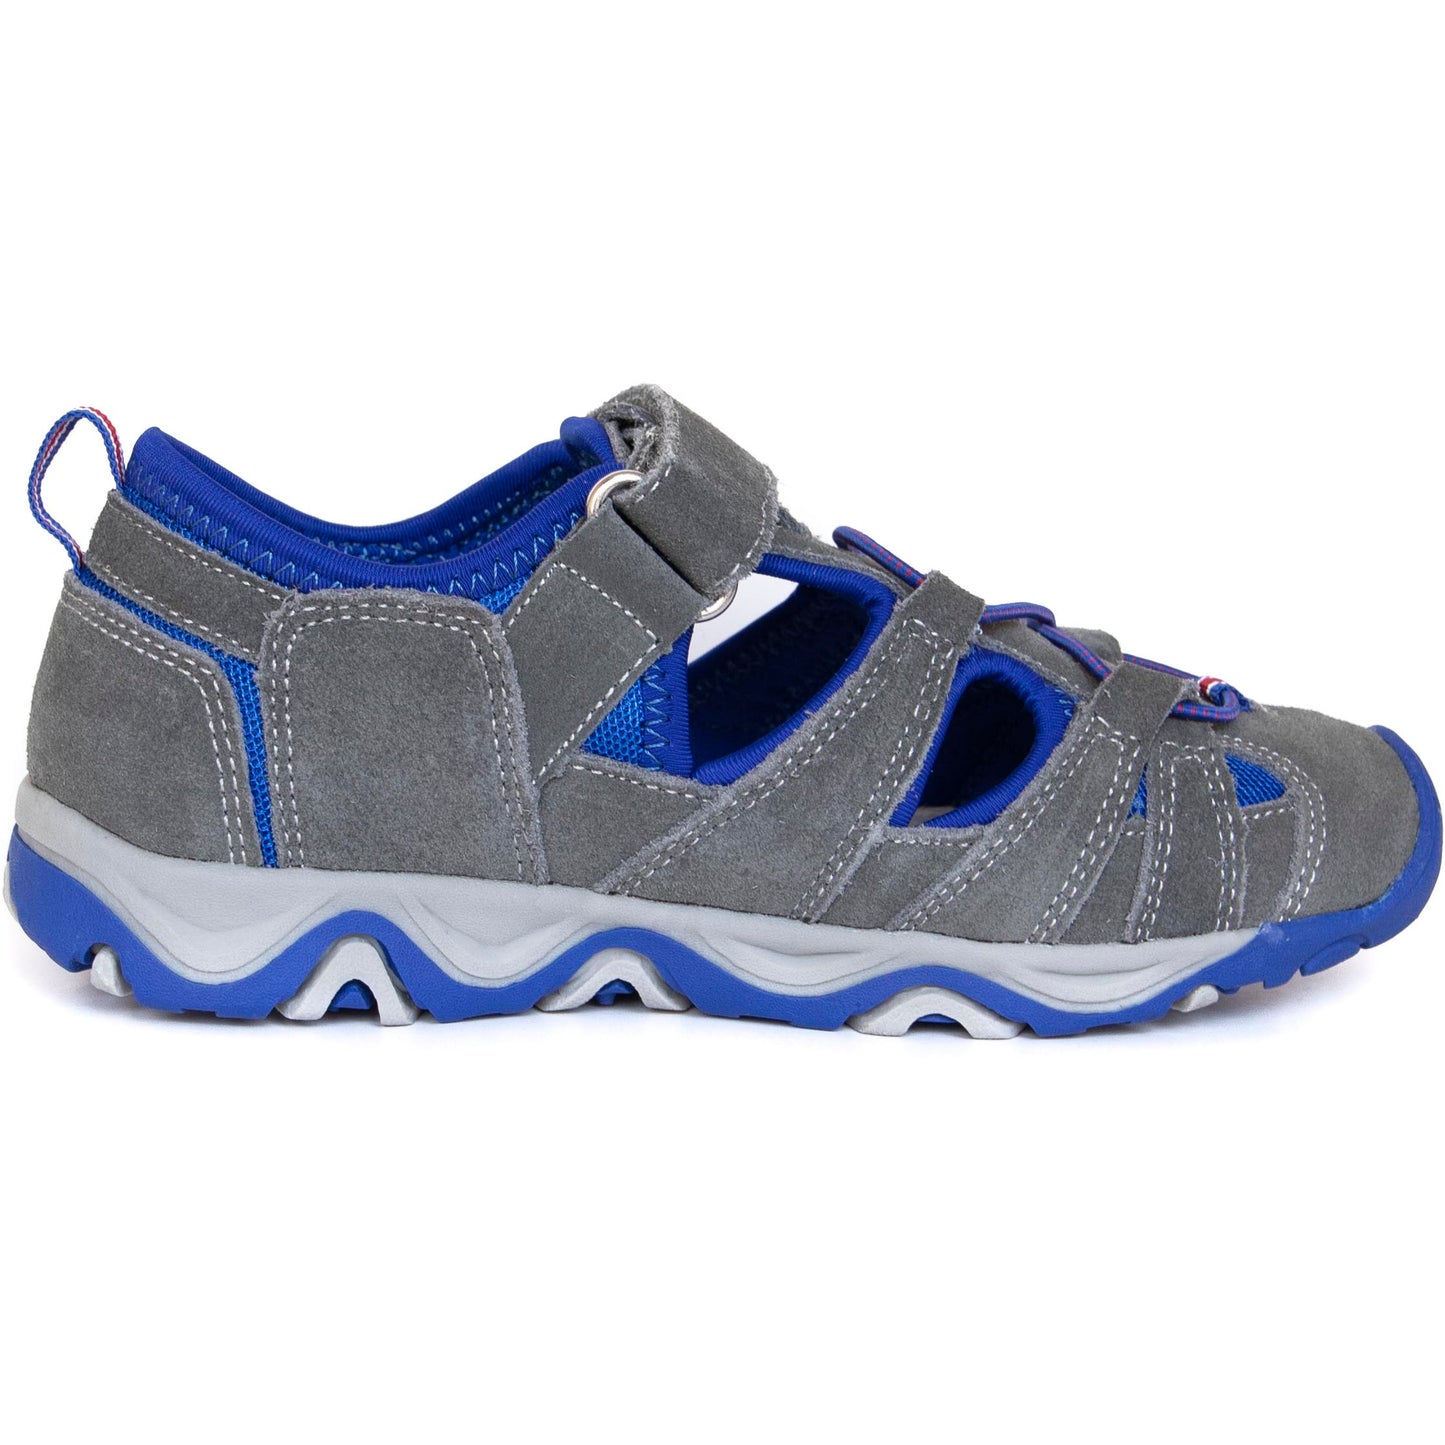 DAFY grey older boys arch support sandals - feelgoodshoes.ae